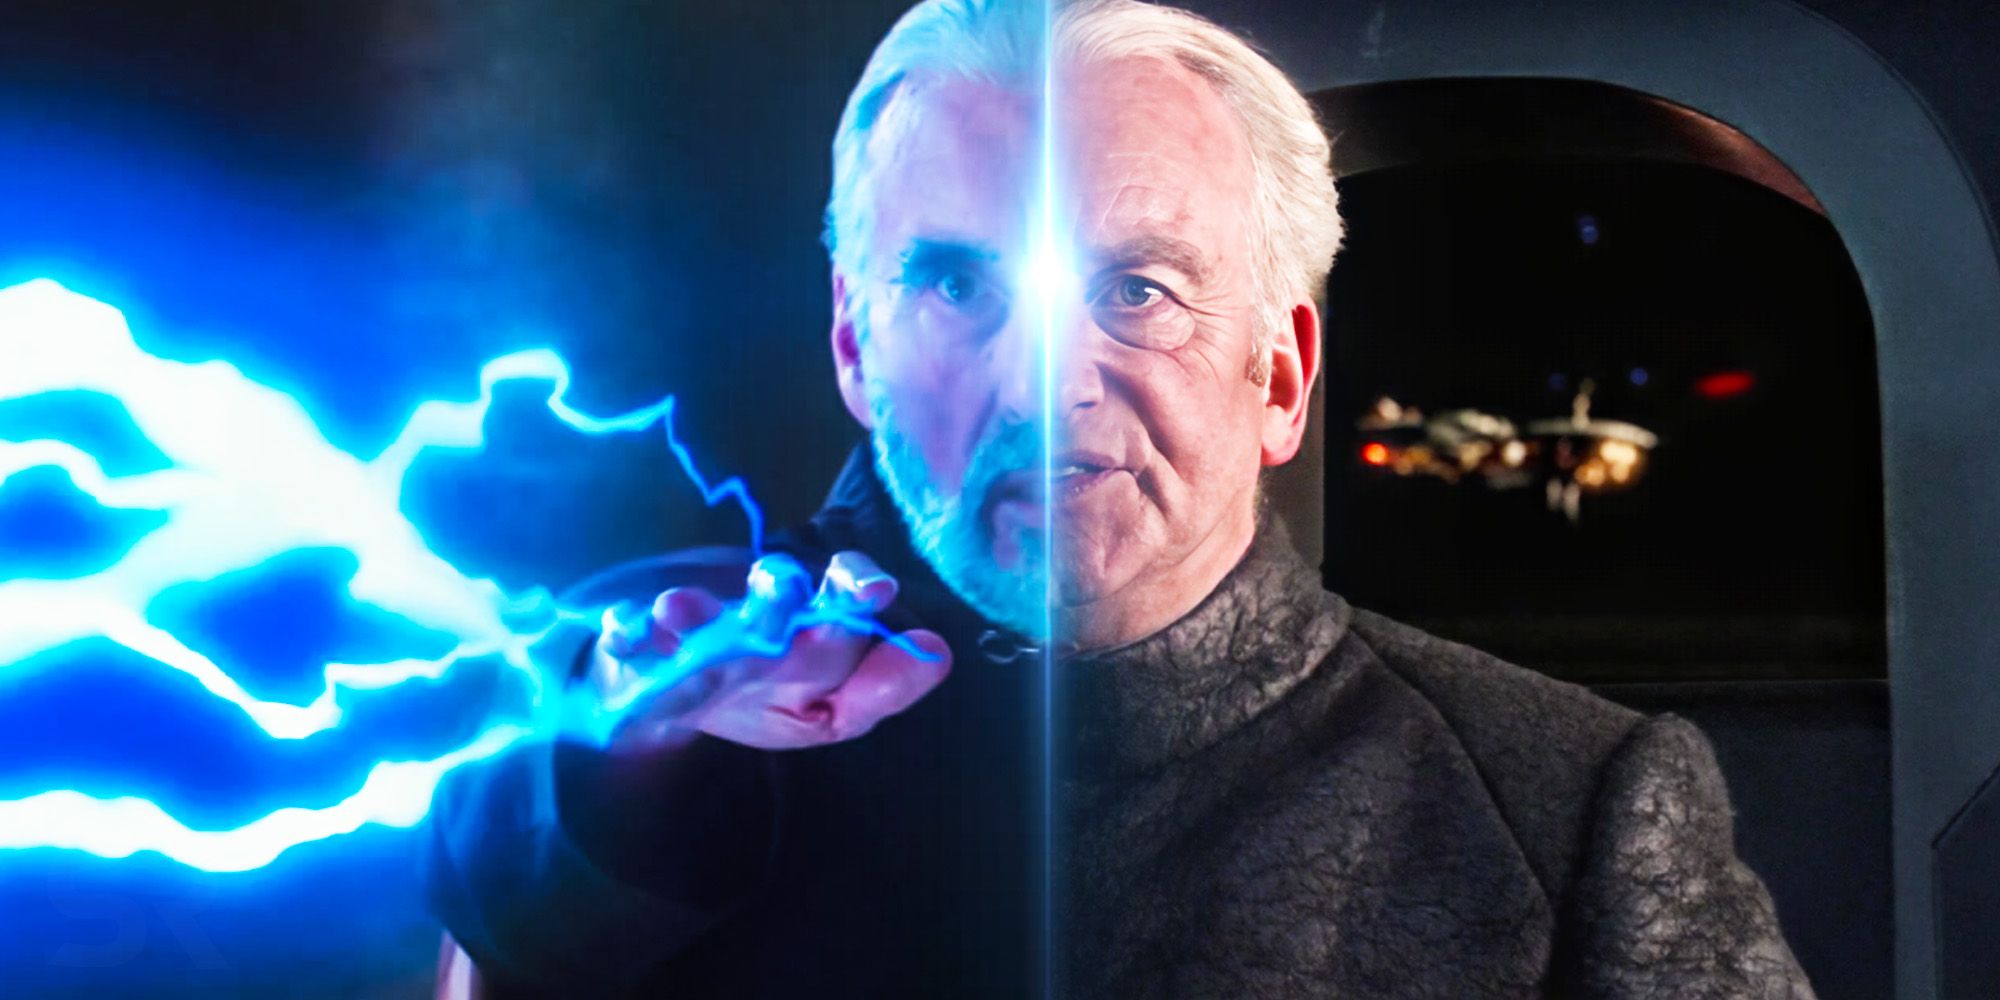 A split-screen image of Count Dooku and Emperor Palpatine